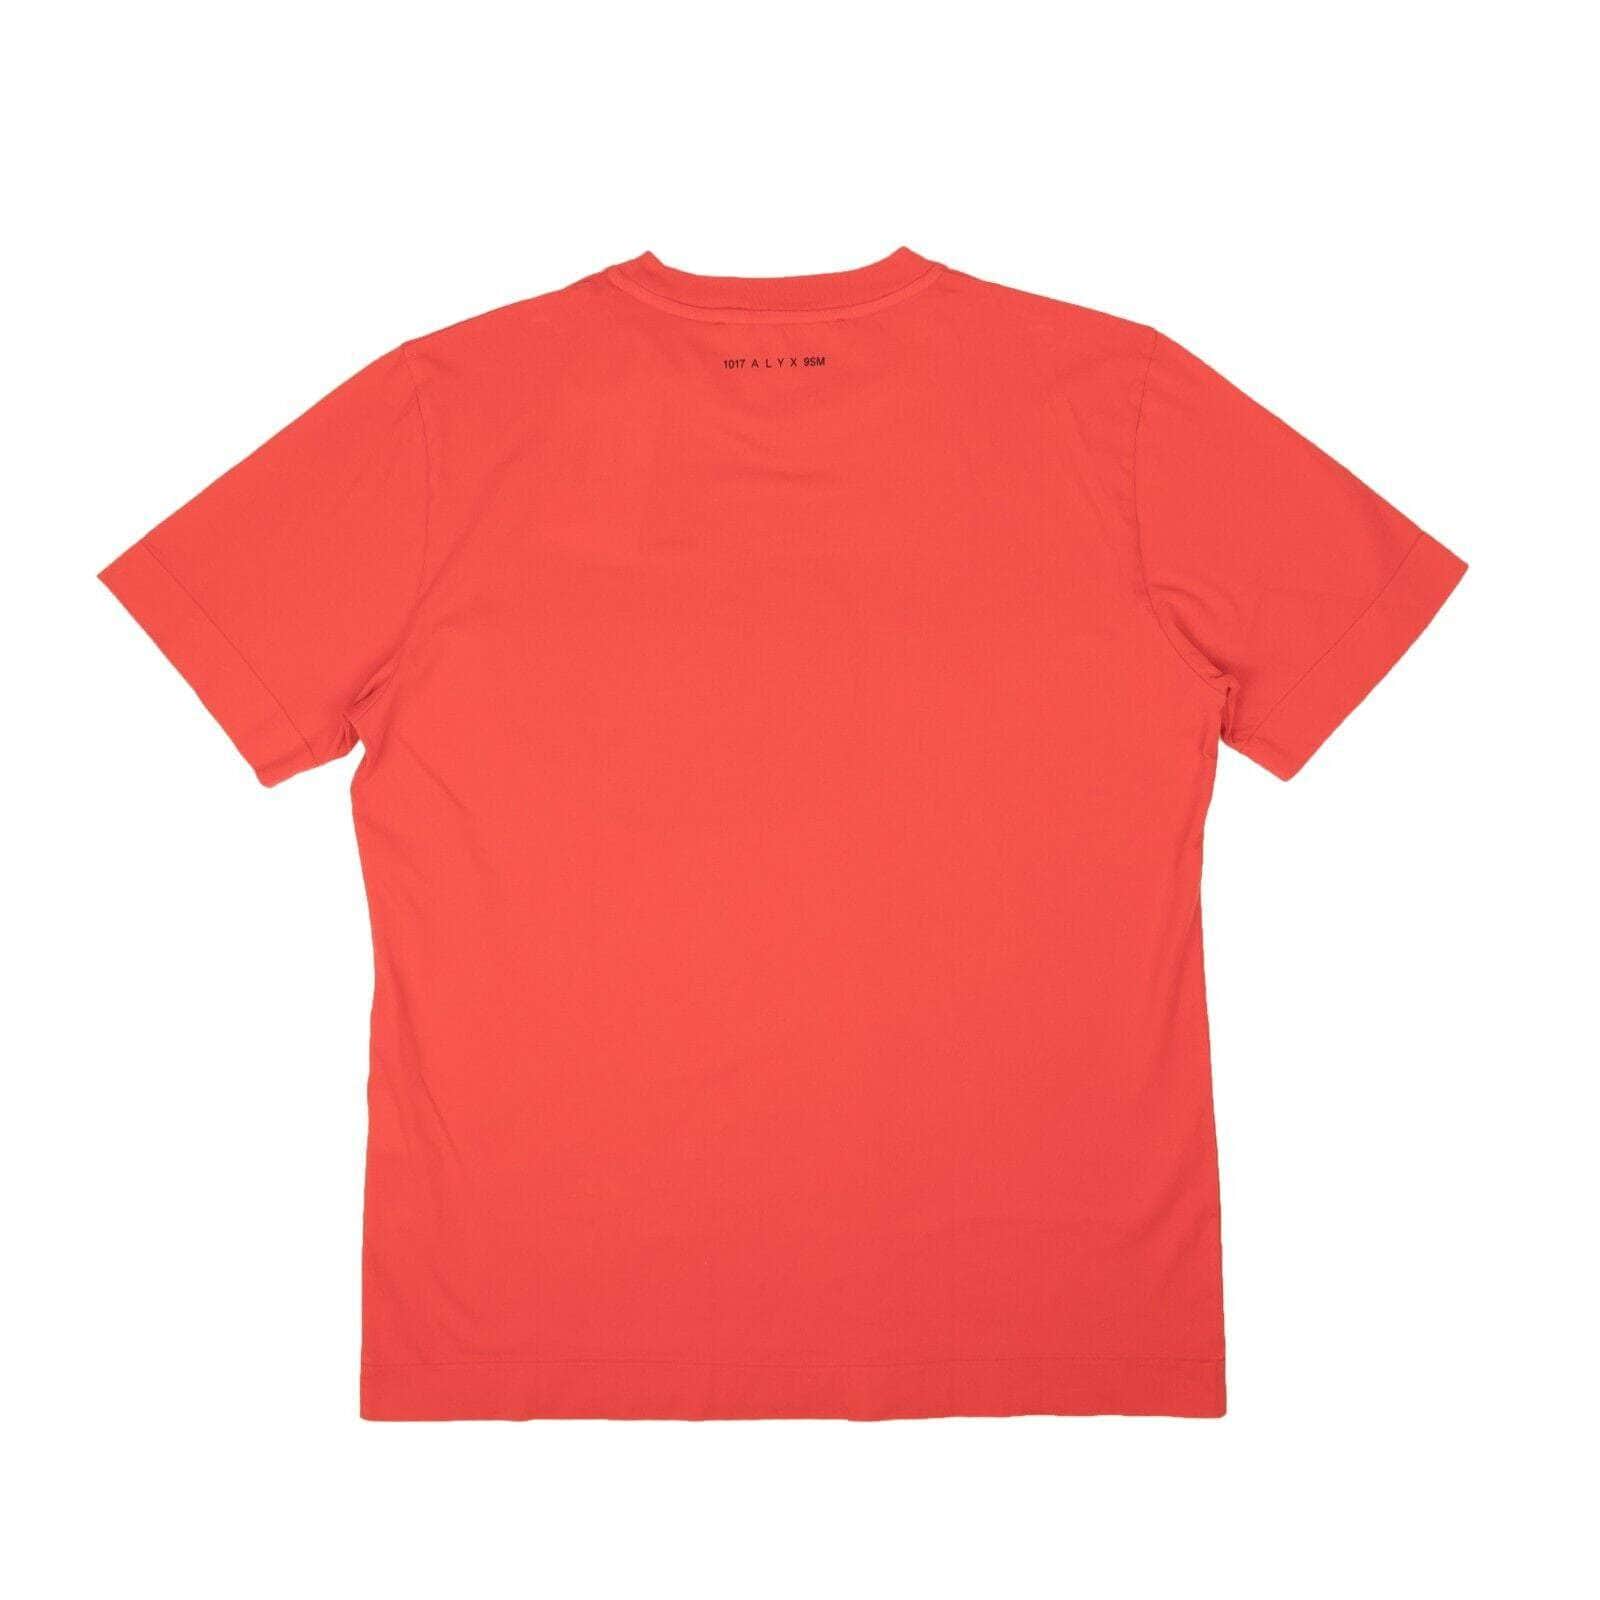 Alyx alyx, channelenable-all, chicmi, couponcollection, gender-mens, main-clothing, mens-shoes, size-l, under-250 L Red Third Eye Smile Short Sleeve T-Shirt ALX-XTSH-0003/L ALX-XTSH-0003/L